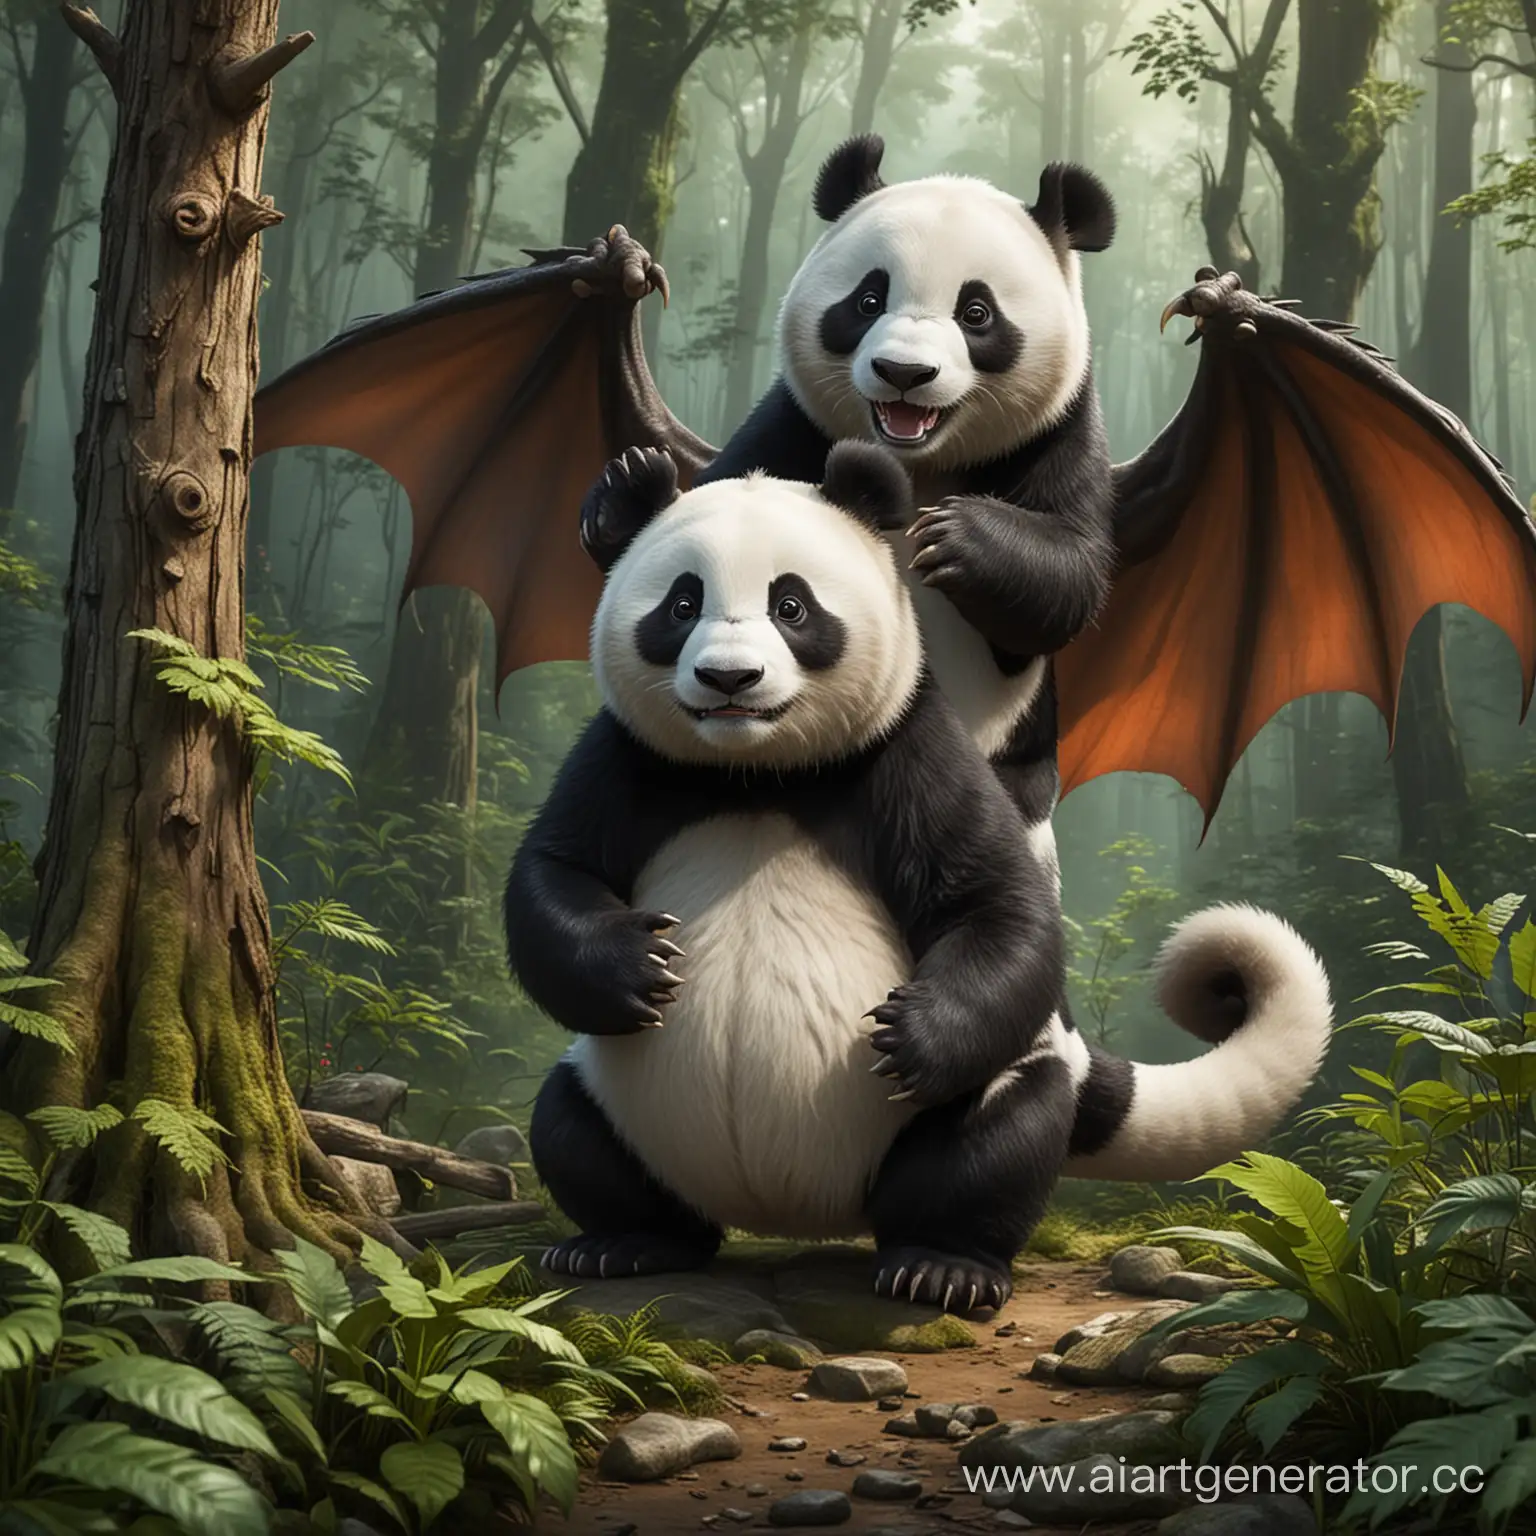 Majestic-Dragon-and-Playful-Panda-Encounter-in-Enchanted-Forest